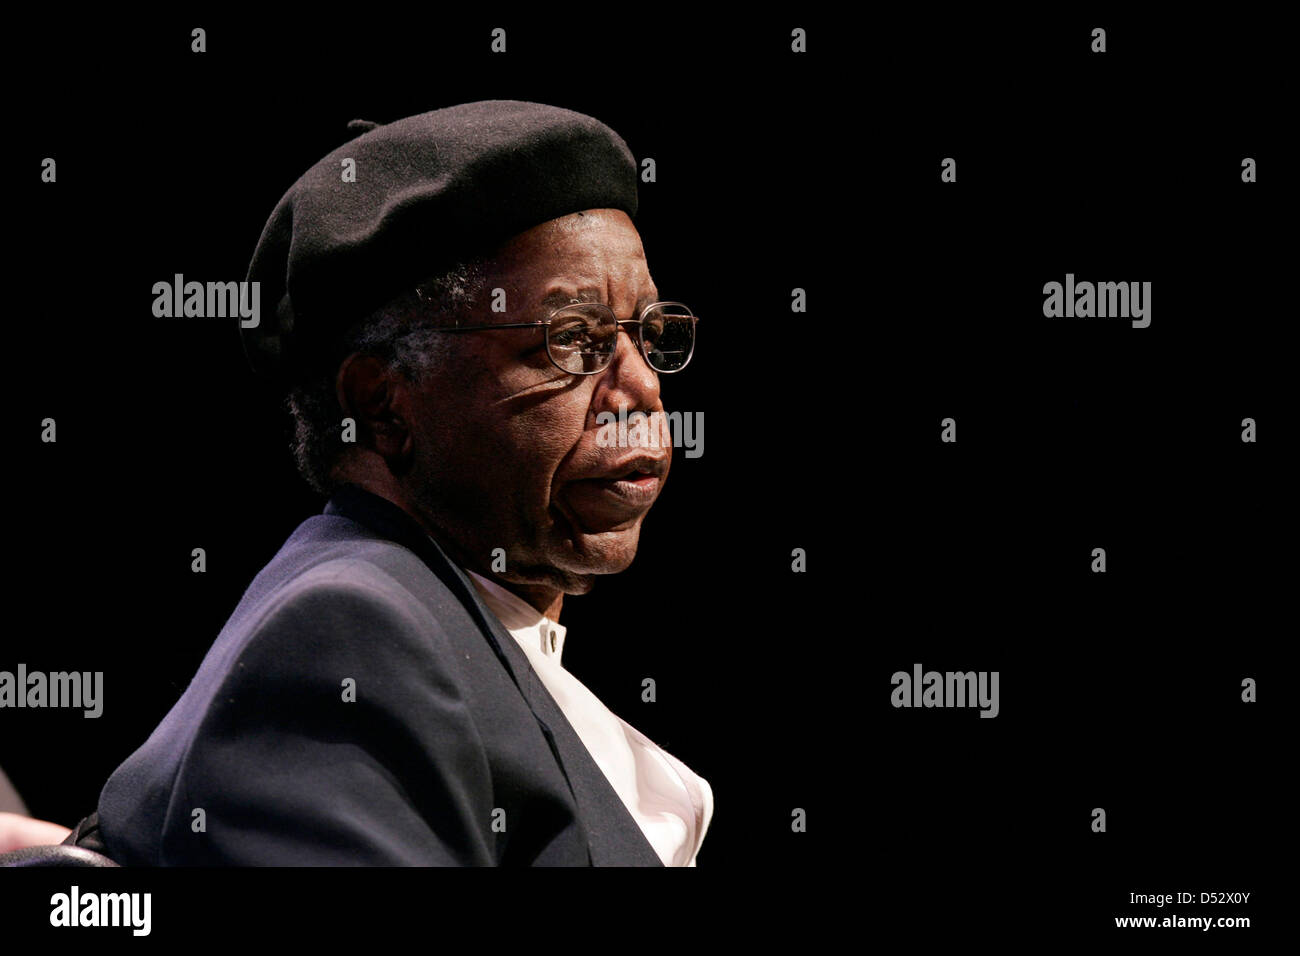 March 22, 2013 - Renowned Nigerian author CHINUA ACHEBE has died at the age of 82 after a brief illness. A statement from his family said his "wisdom and courage" were an "inspiration to all who knew him". One of Africa's best known authors, his 1958 debut novel Things Fall Apart, which dealt with the impact of colonialism in Africa, has sold more than 10 million copies. He had been living in the US since 1990 following injuries from a car crash. Pictured:  Apr 26, 2006 - New York, U.S. - Writer Chinua Achebe participates in the PEN World Voices Festival of International Literature. (Credit Im Stock Photo